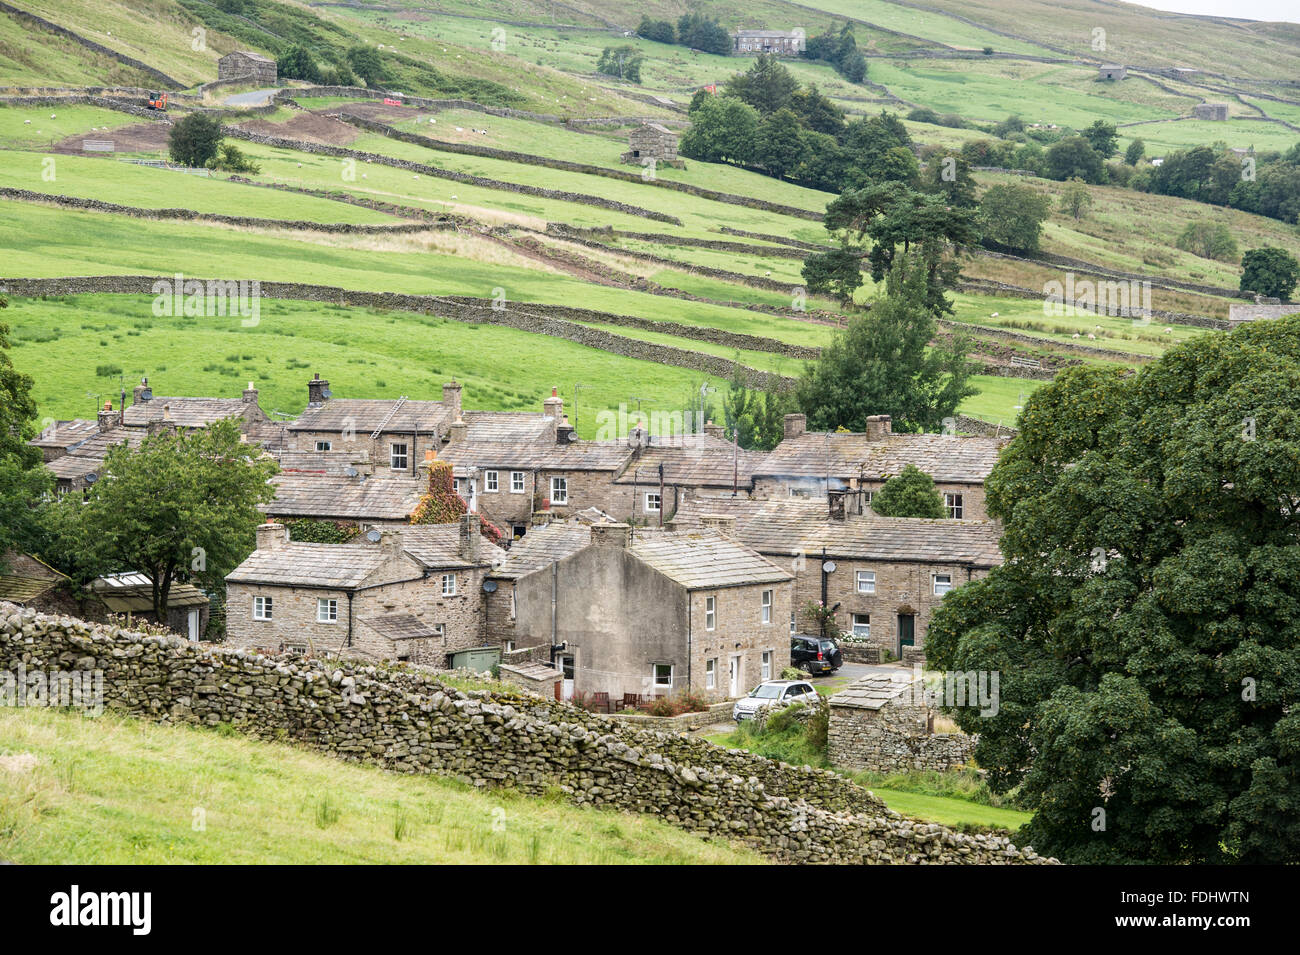 Town of Reeth in Yorkshire, England, UK. Stock Photo